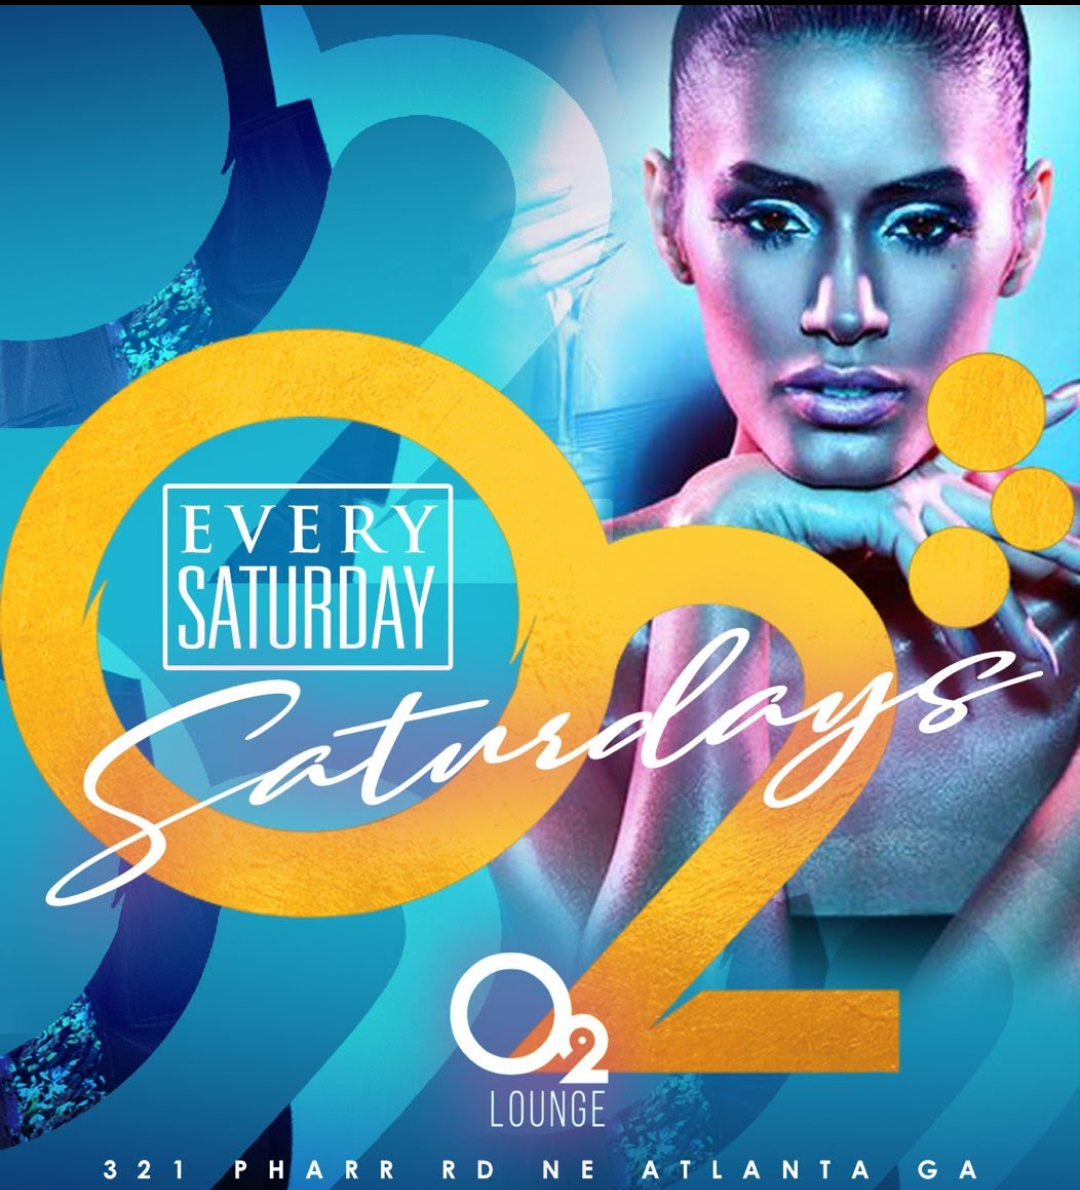 FREE BOTTLE when you call (678)310-5587 to prepay for a section